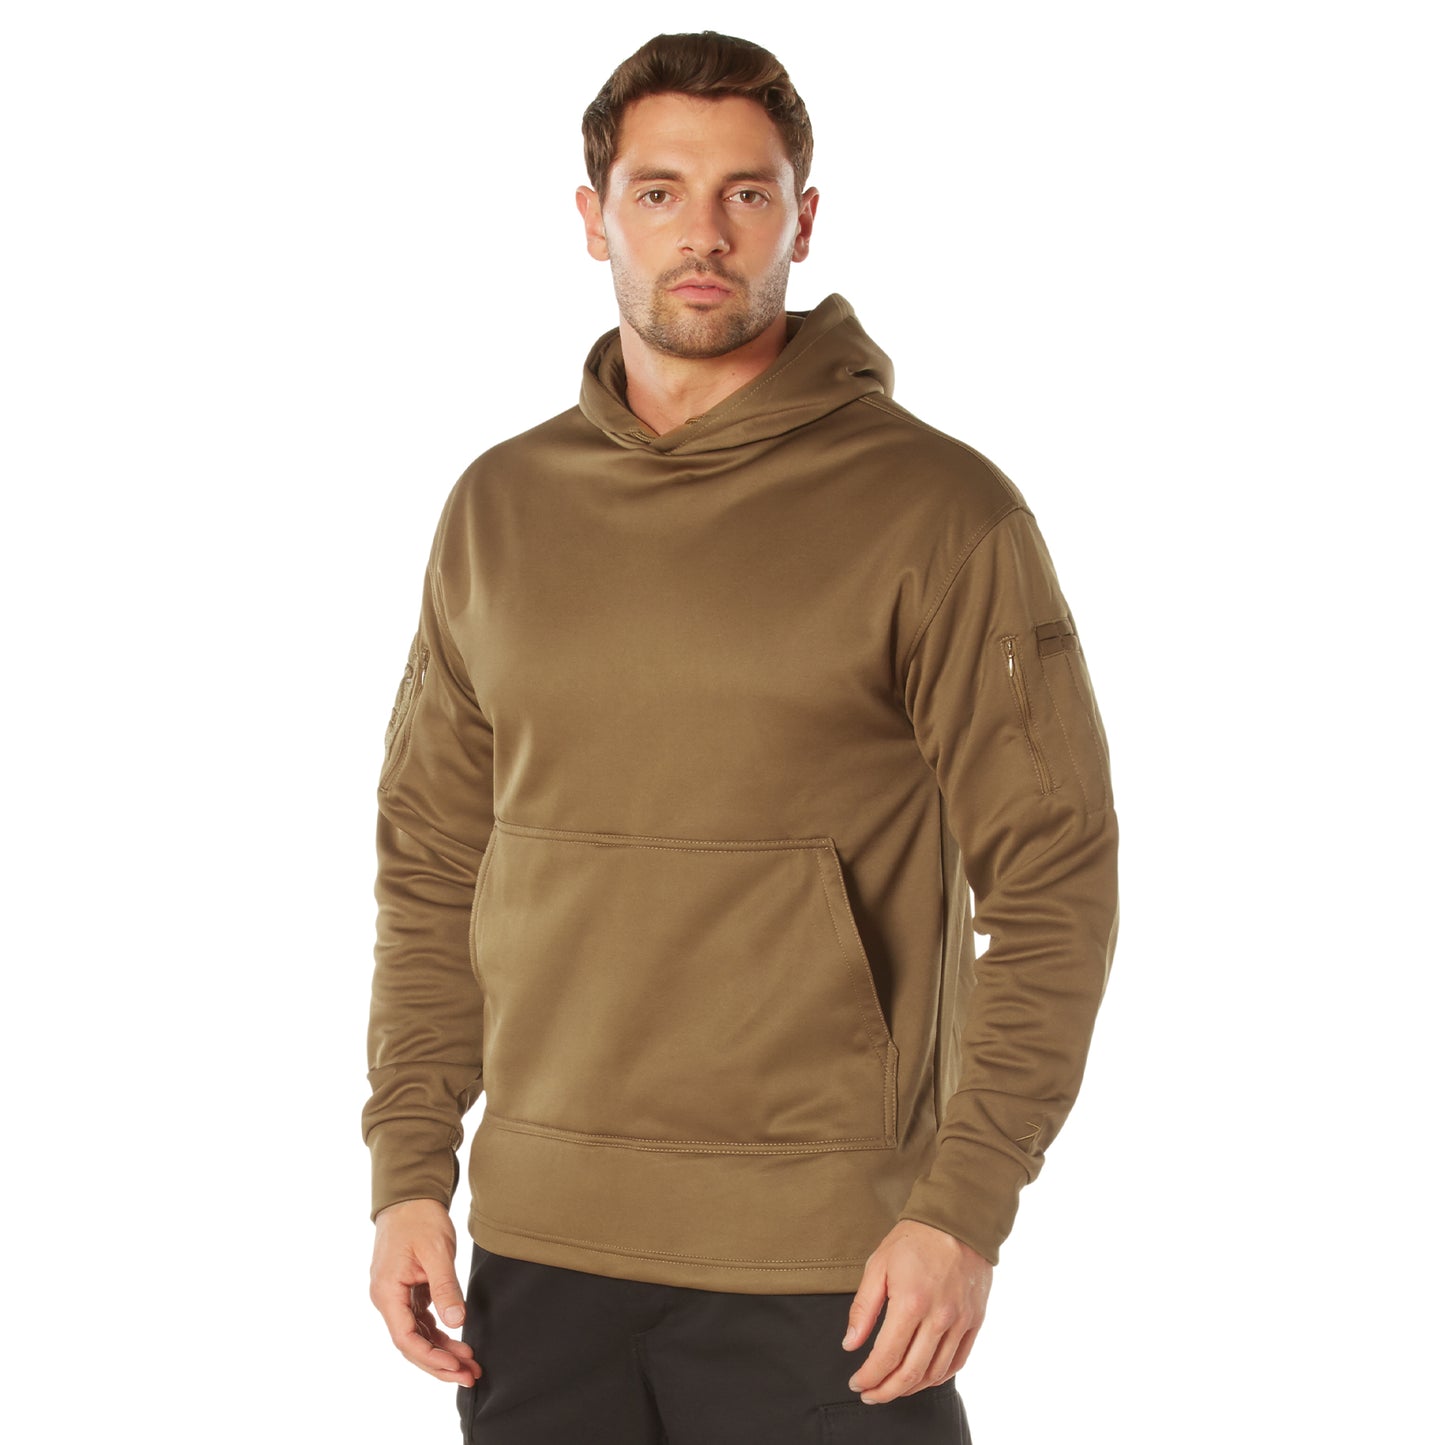 Rothco Concealed Carry Hoodie - Coyote Brown